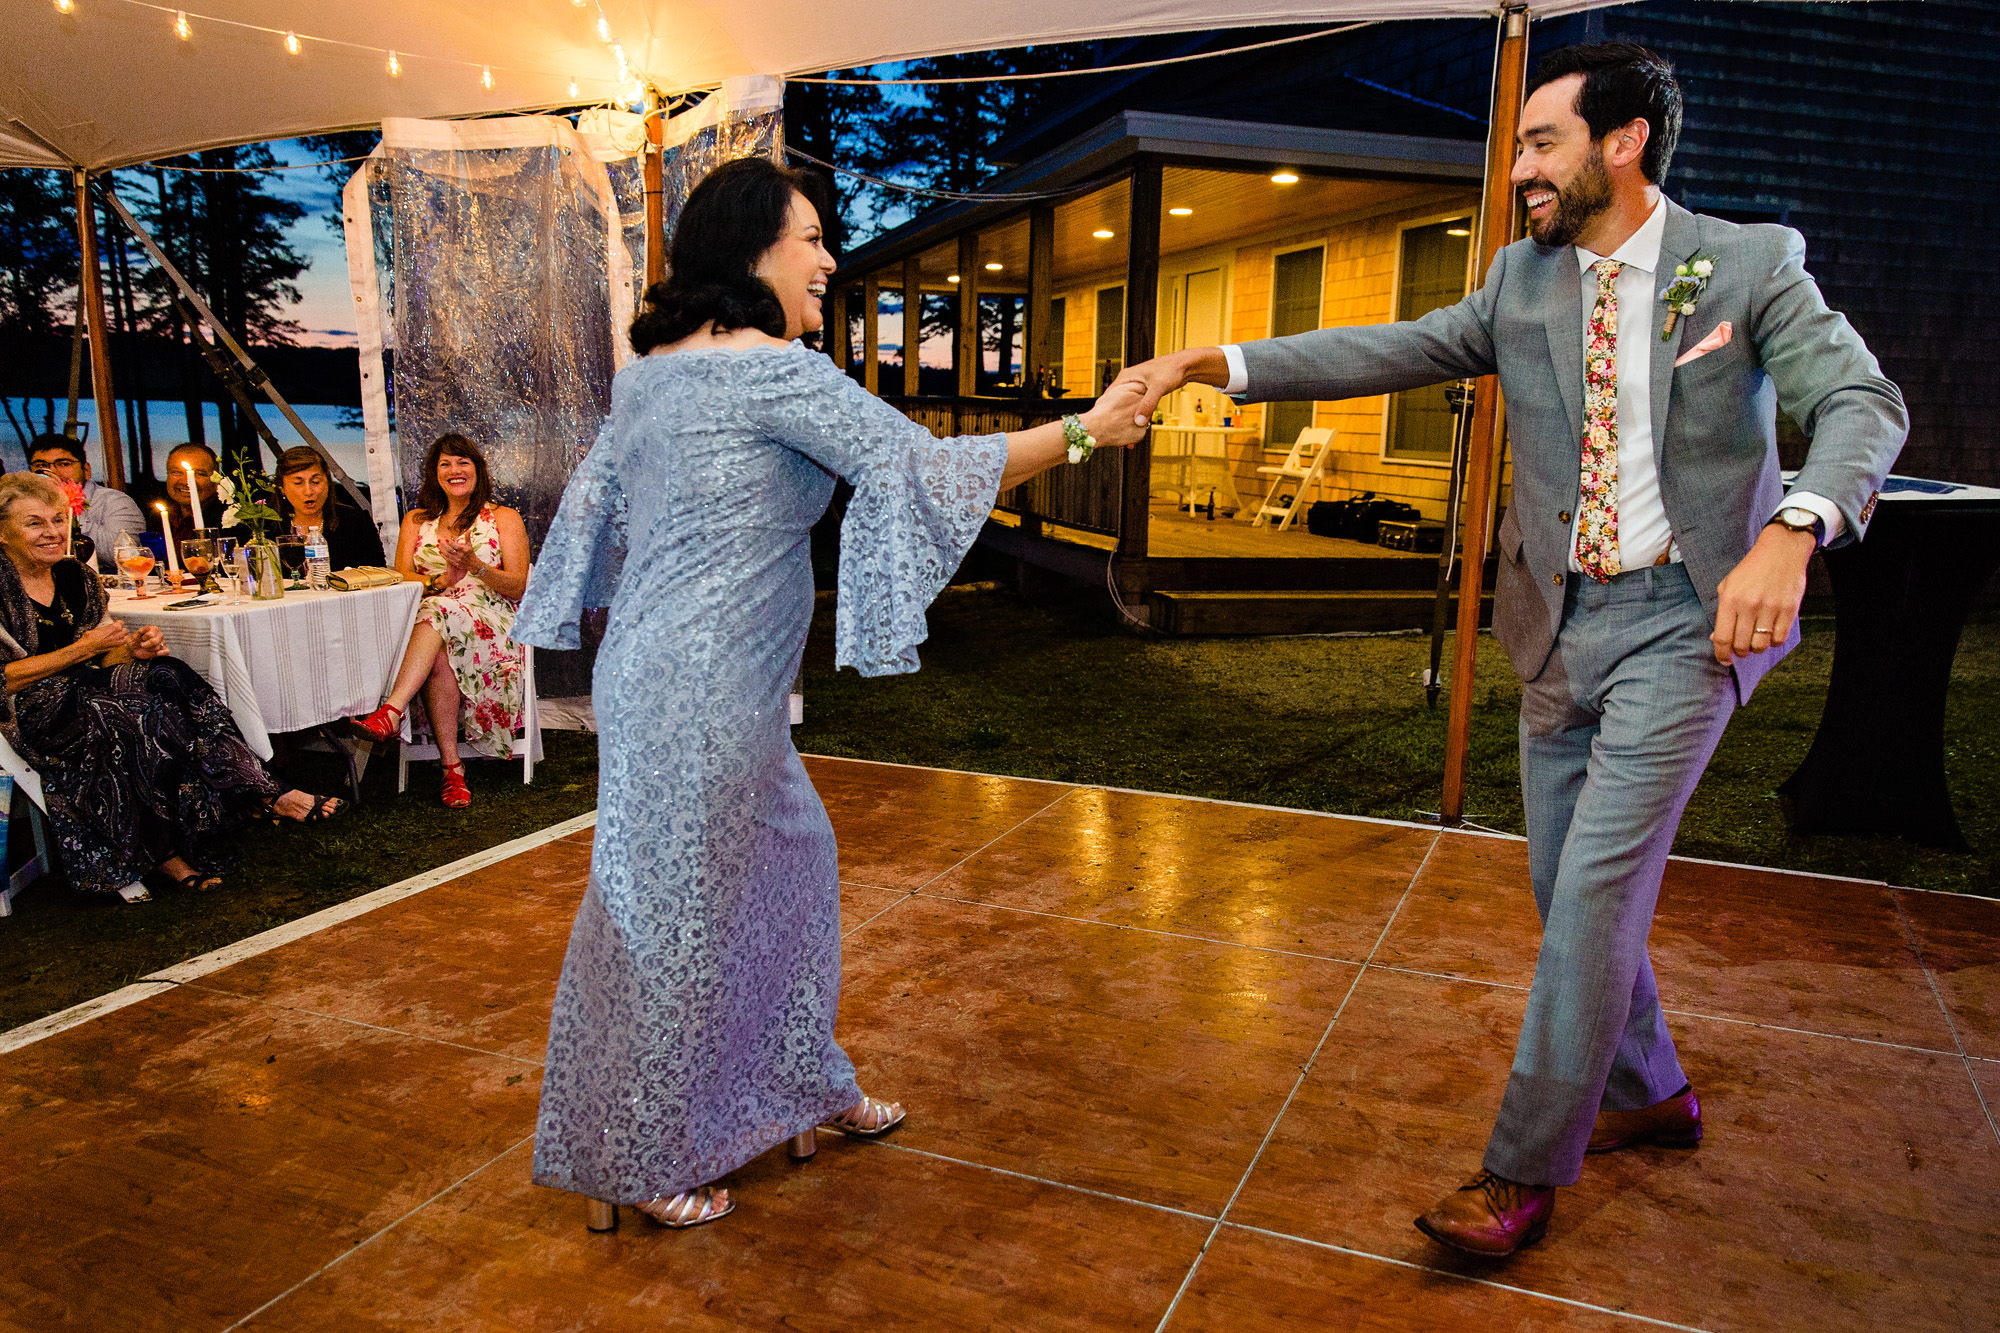 The groom and his mother dance together at a wedding near Bar Harbor, Maine